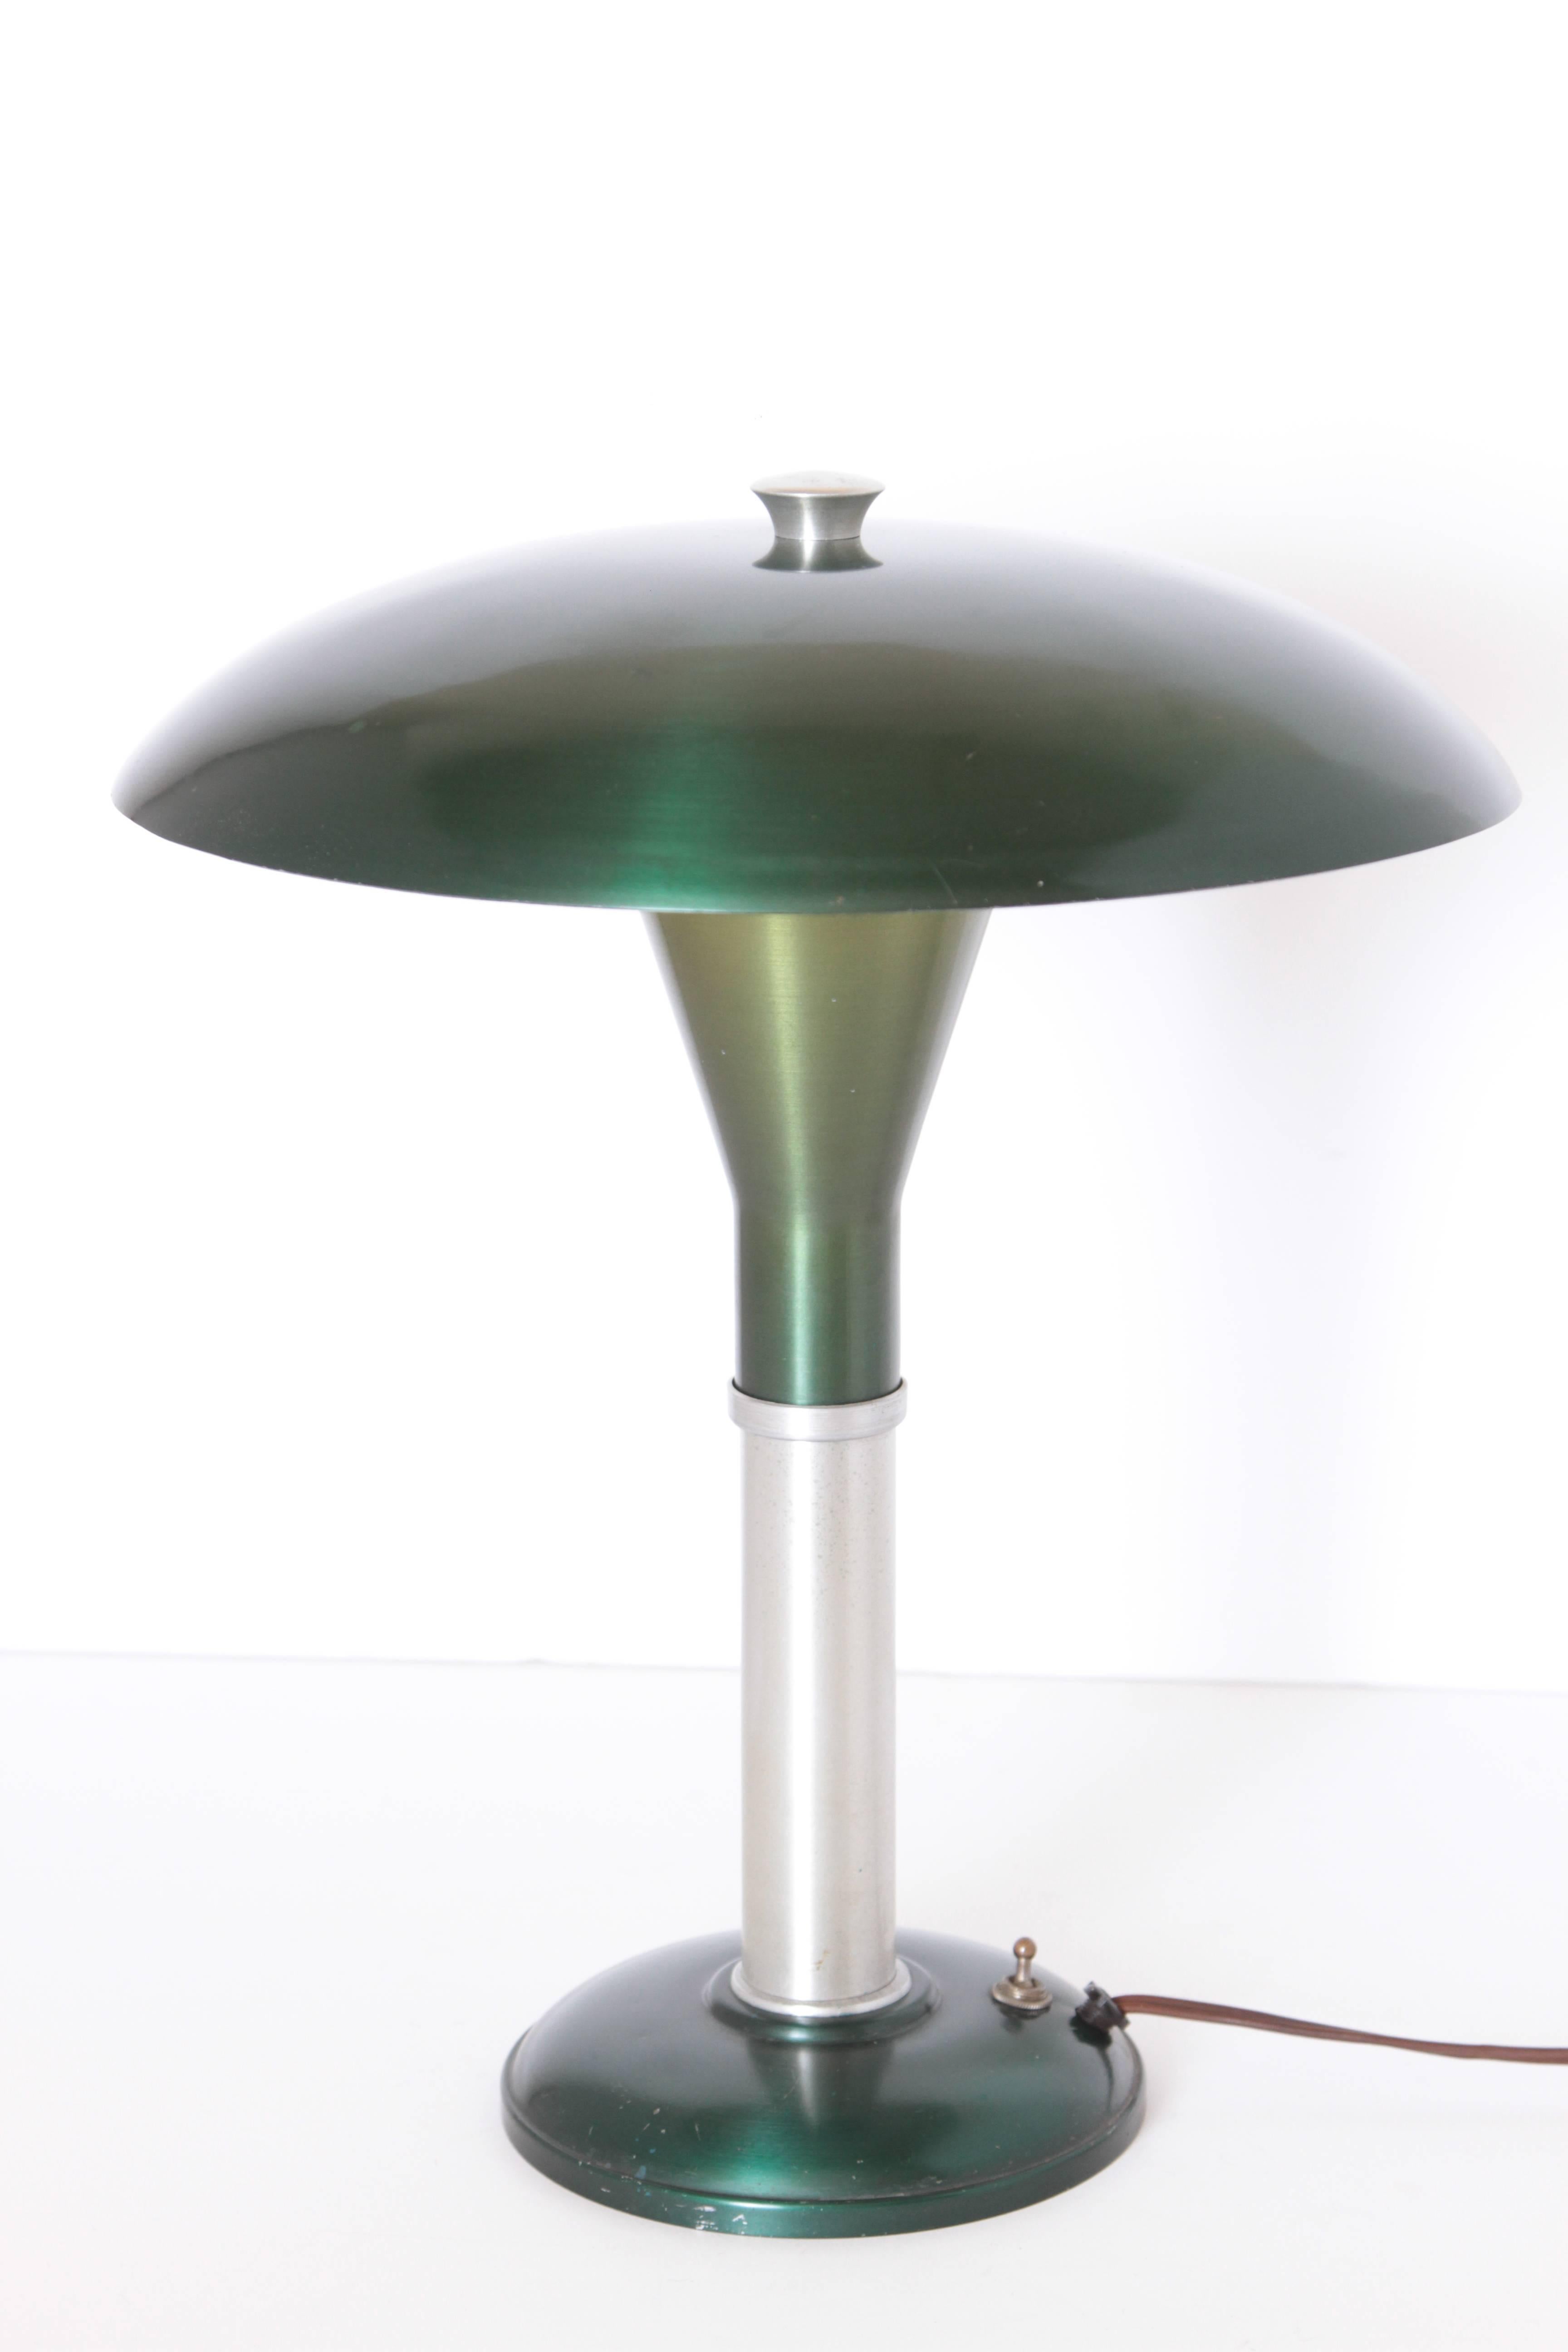 Machine Age Art Deco Mid-Century anodized aluminium "Mooncrest" sight light by Smith Metal Arts

Signed, post Art Deco, Mid-Century spun and anodized aluminium two-tone portable table lamp.
Patented 1949-1950 Design by Laurence E.